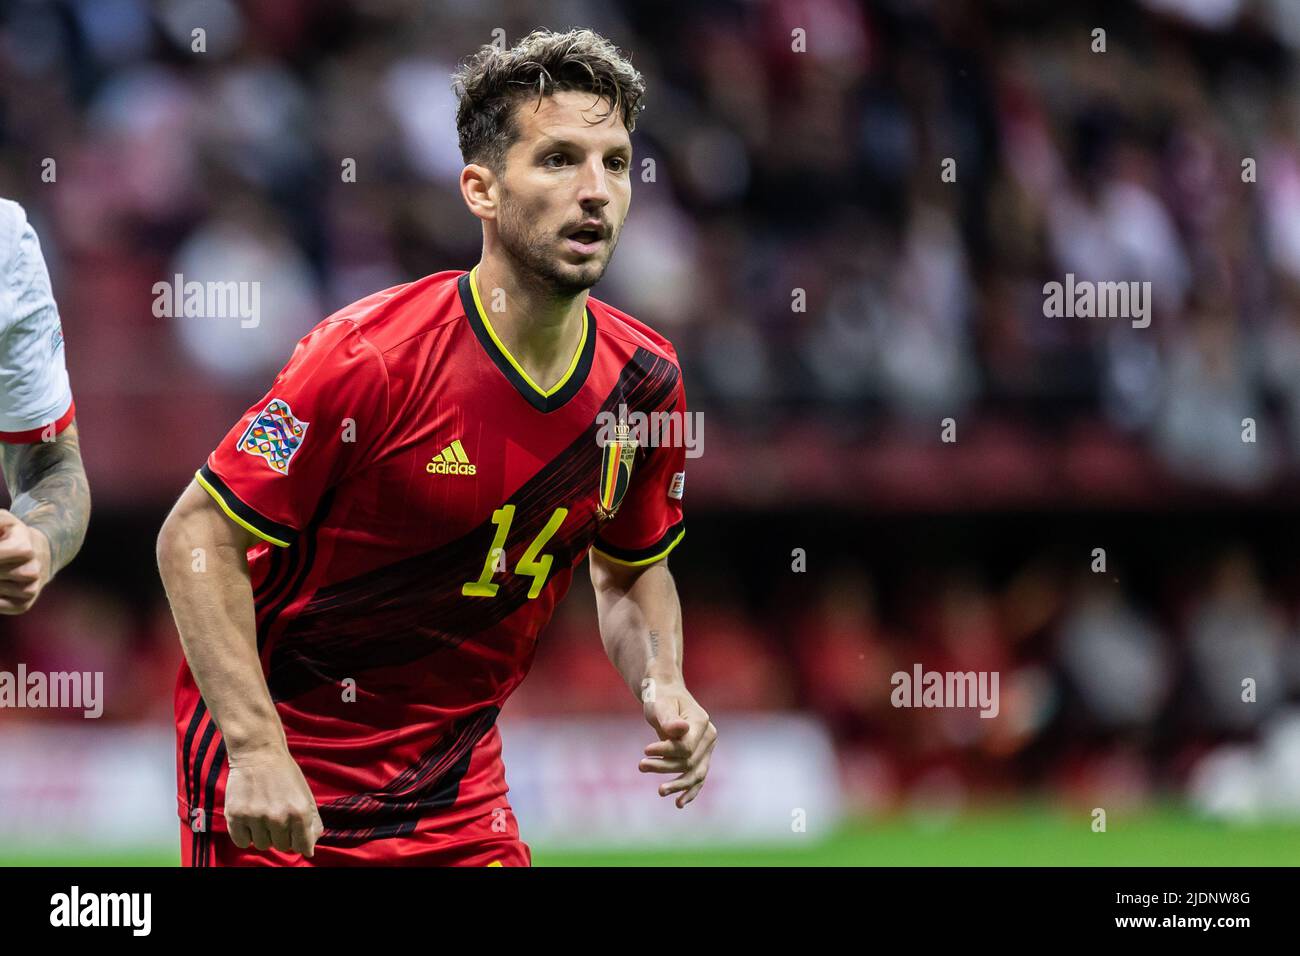 Dries Mertens of Belgium seen in action during the UEFA Nations League, League A Group 4 match between Poland and Belgium at PGE National Stadium.(Final score; Poland 0:1 Belgium) Stock Photo